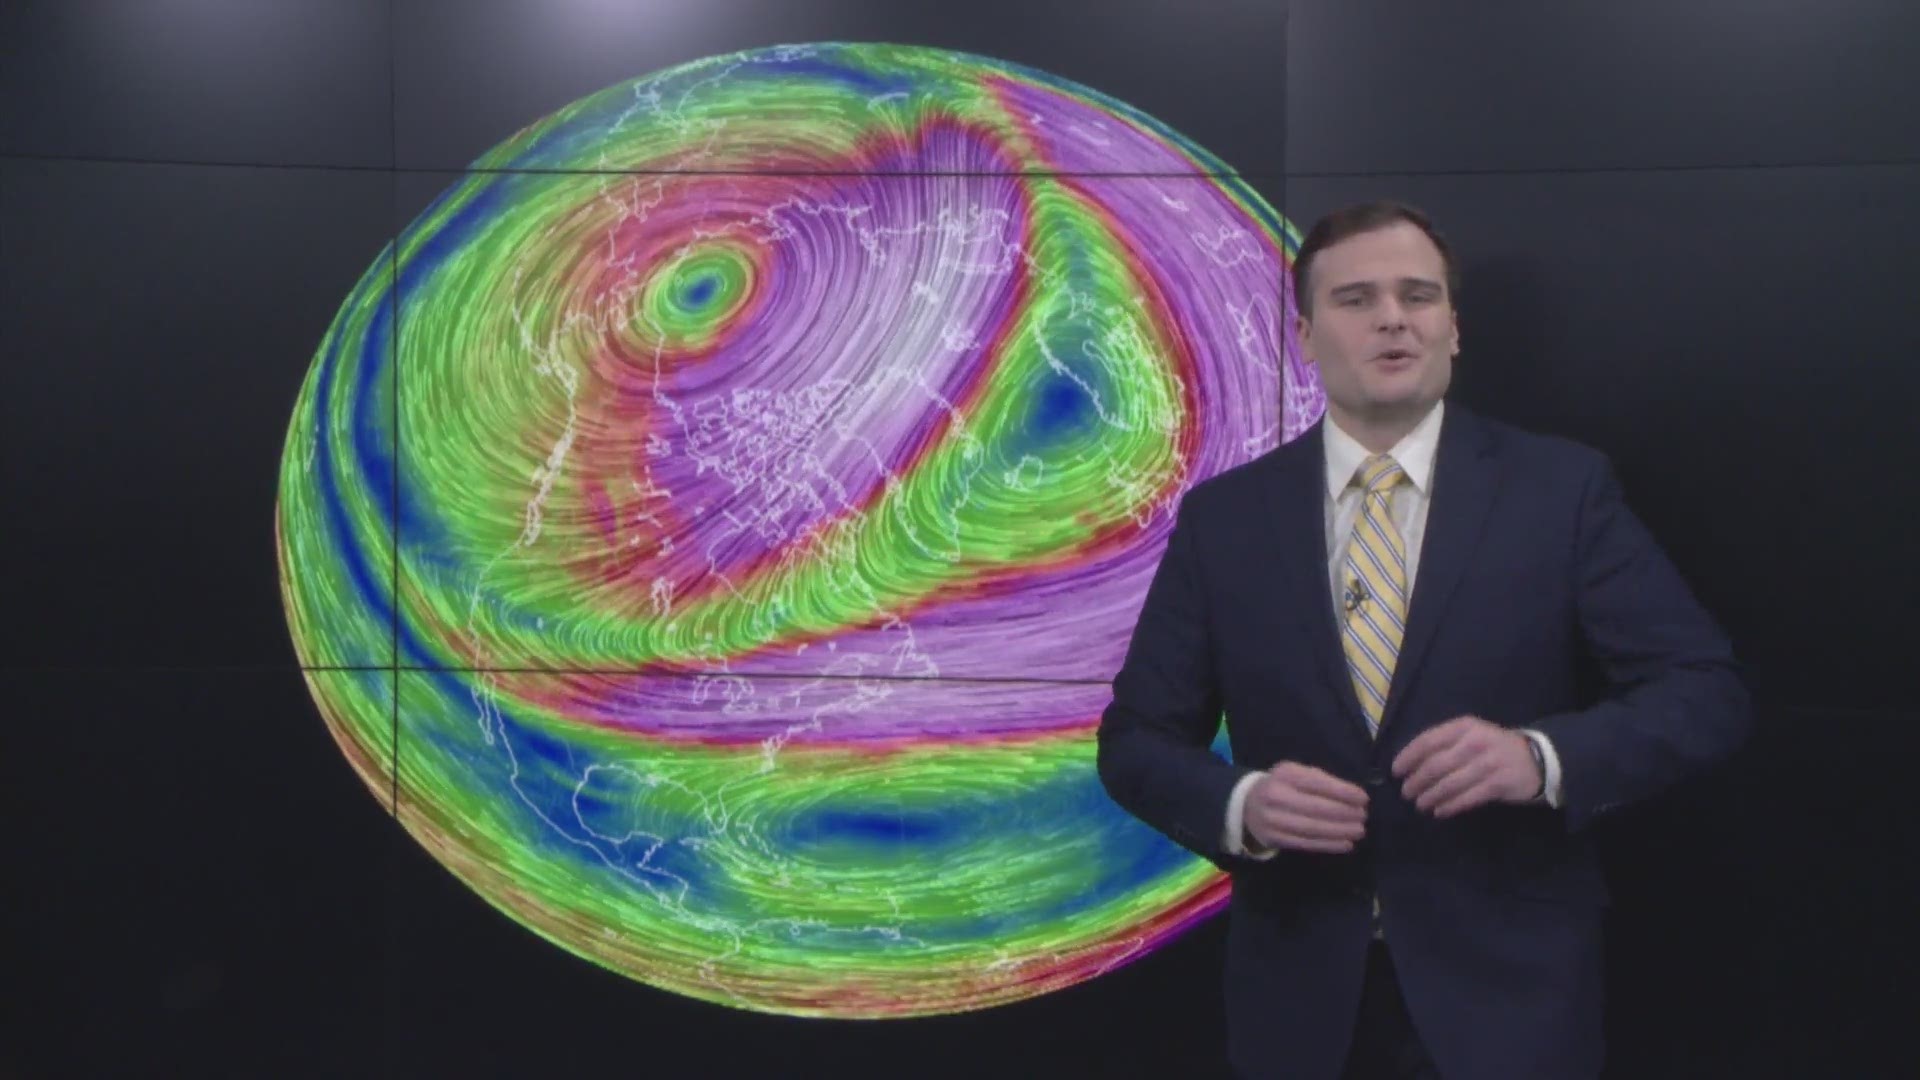 A polar vortex is a constant area of low pressure located over the poles that is strongest during the winter months.